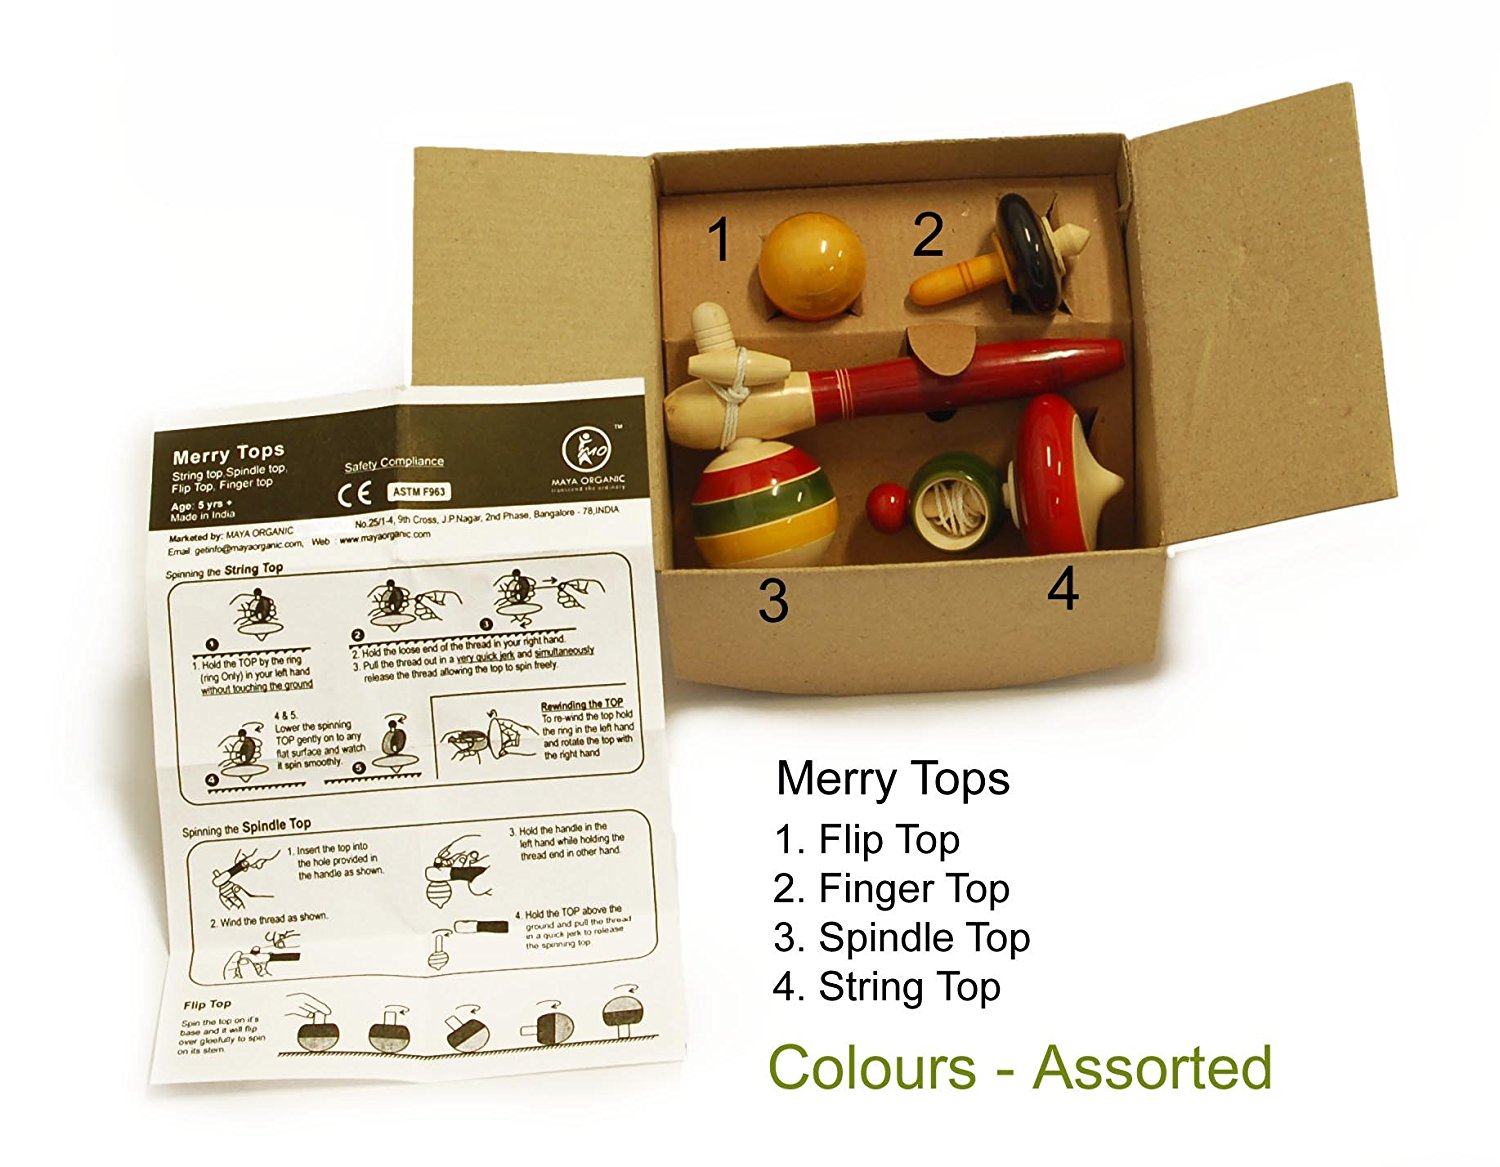 Merry Tops - Assorted Spinning Tops